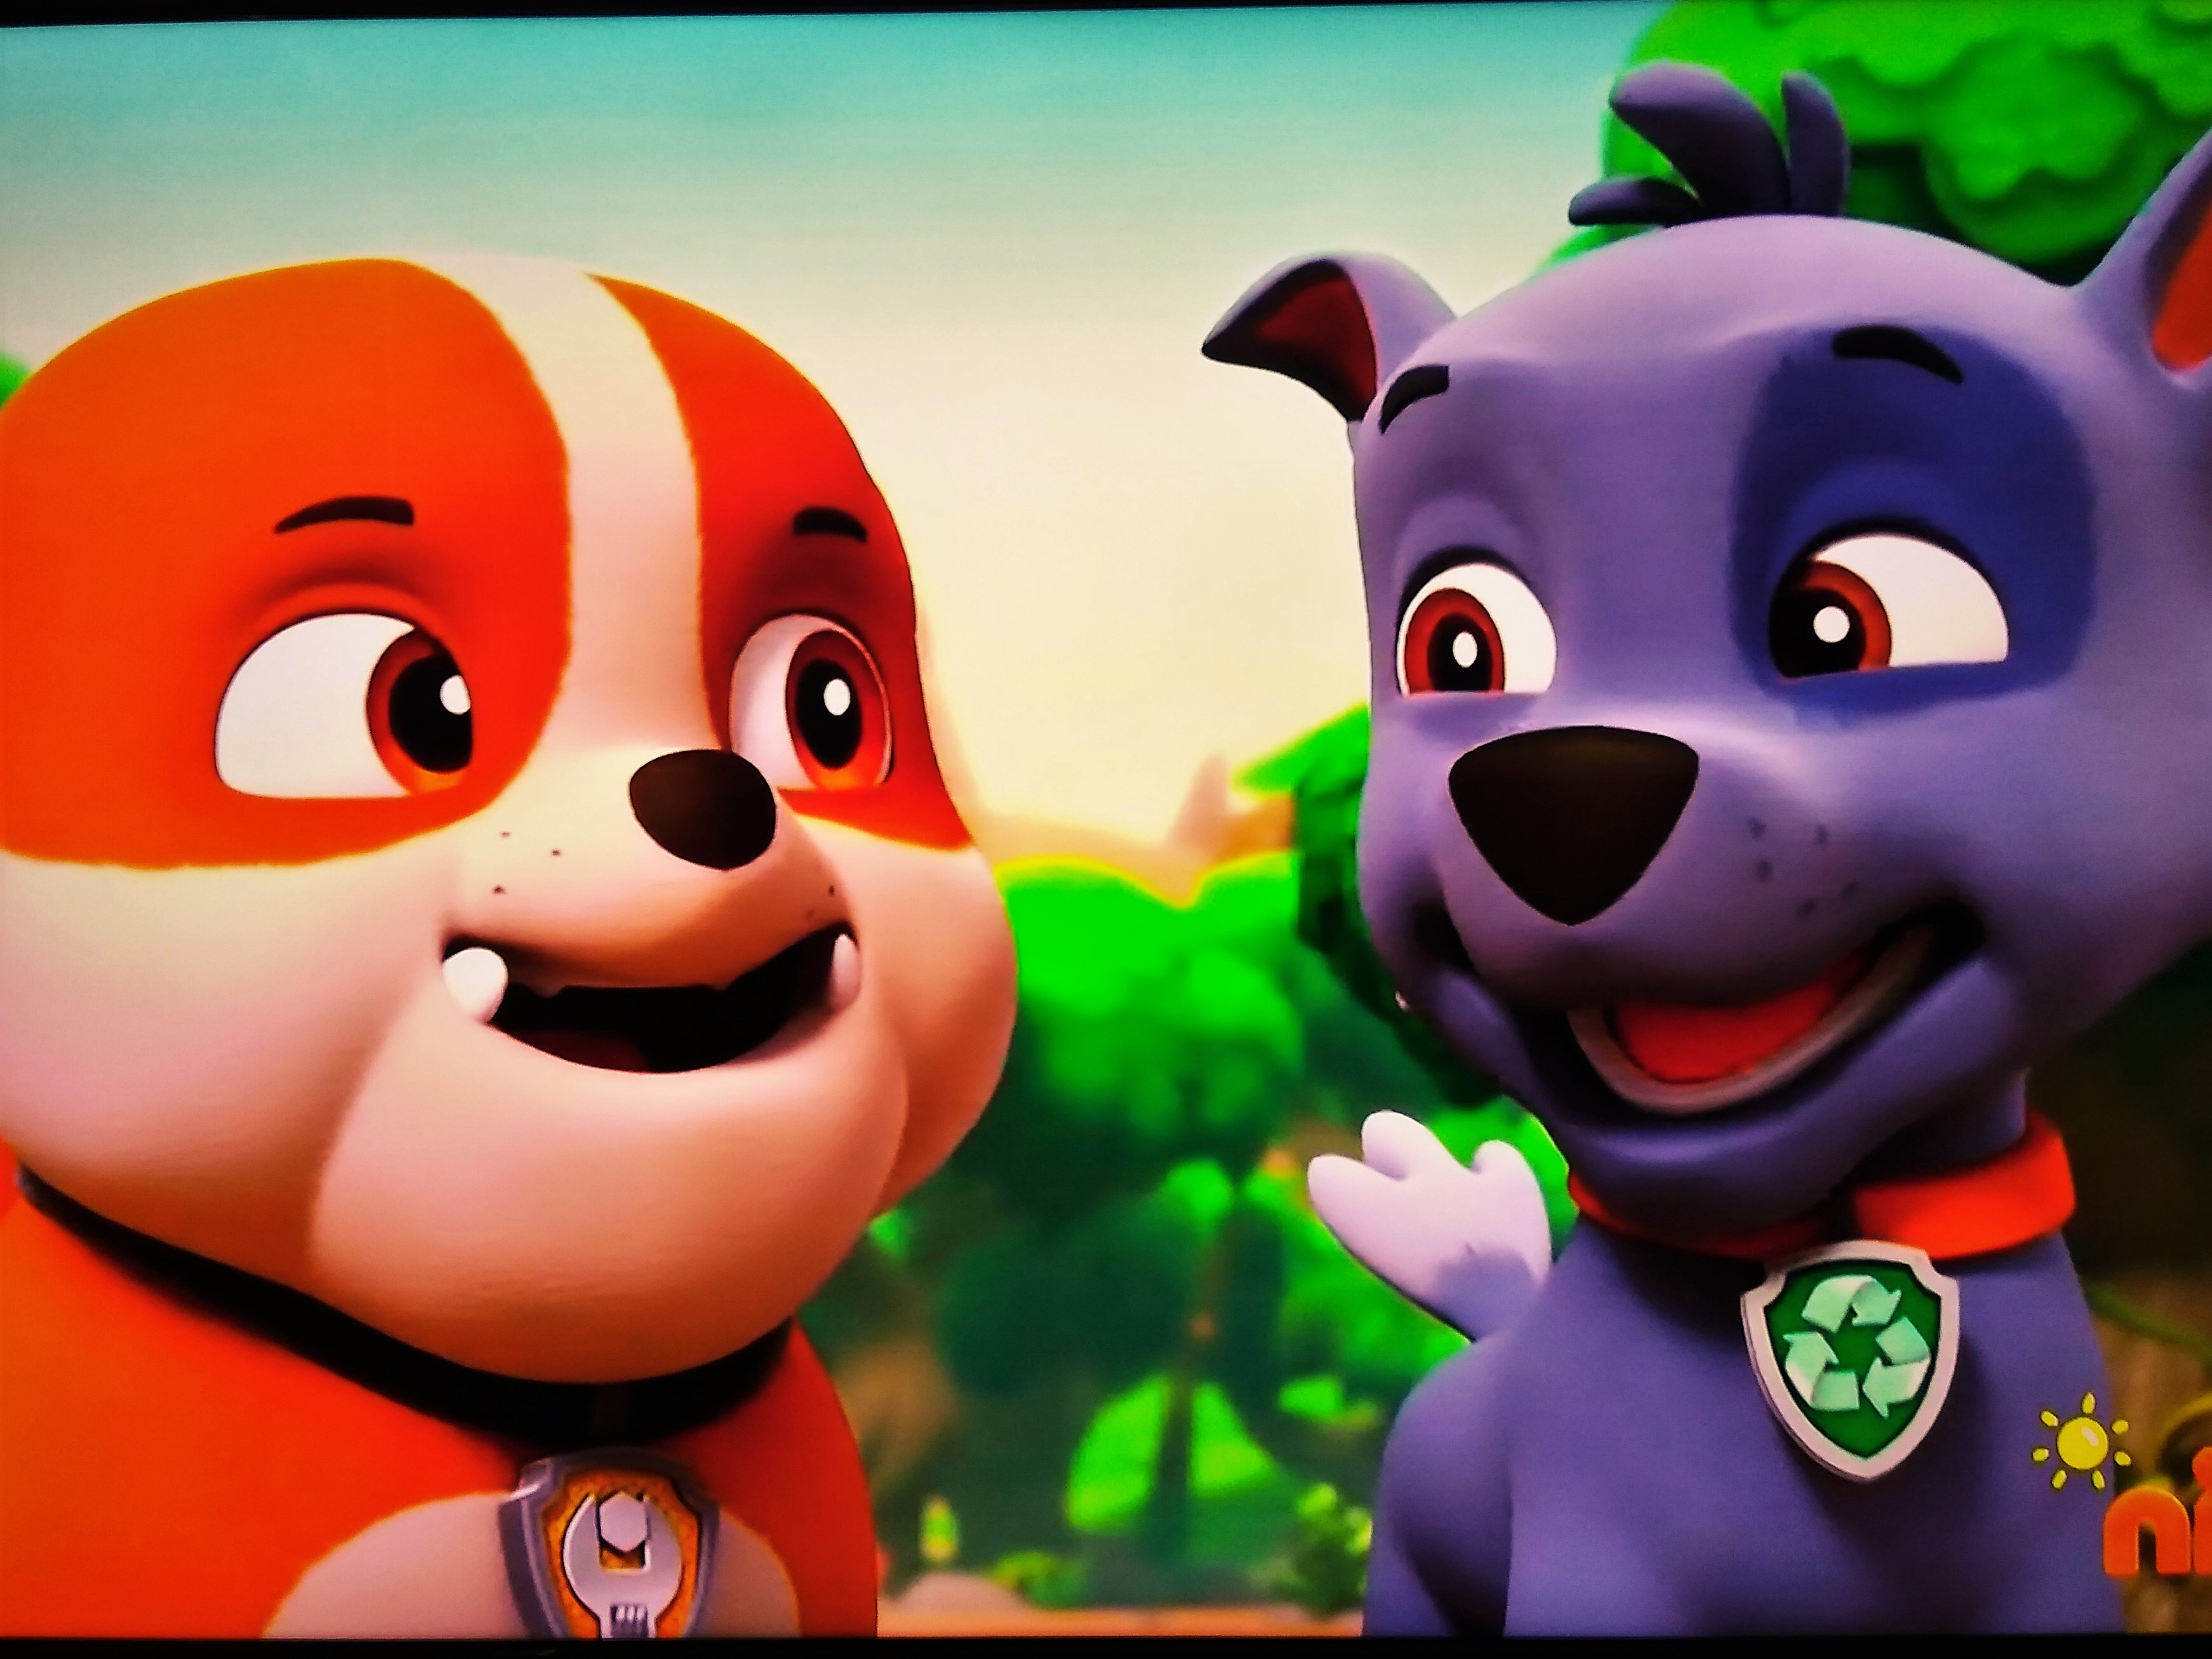 rubble and rocky paw patrol